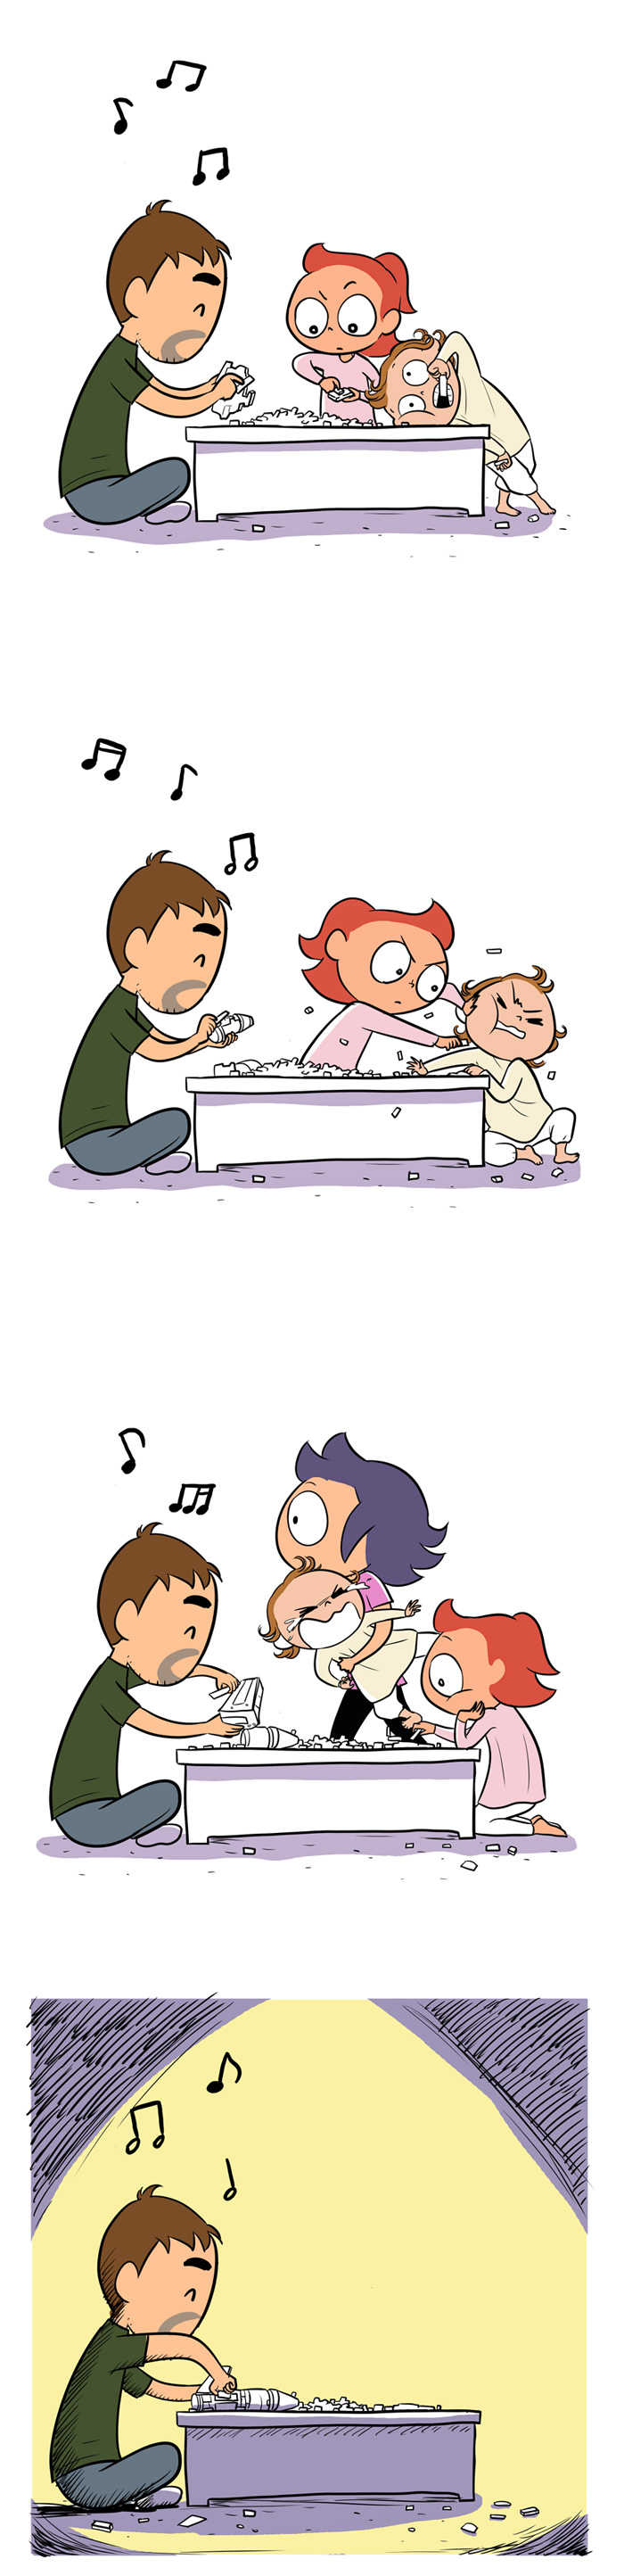 When Dad Buys Toys - Comic